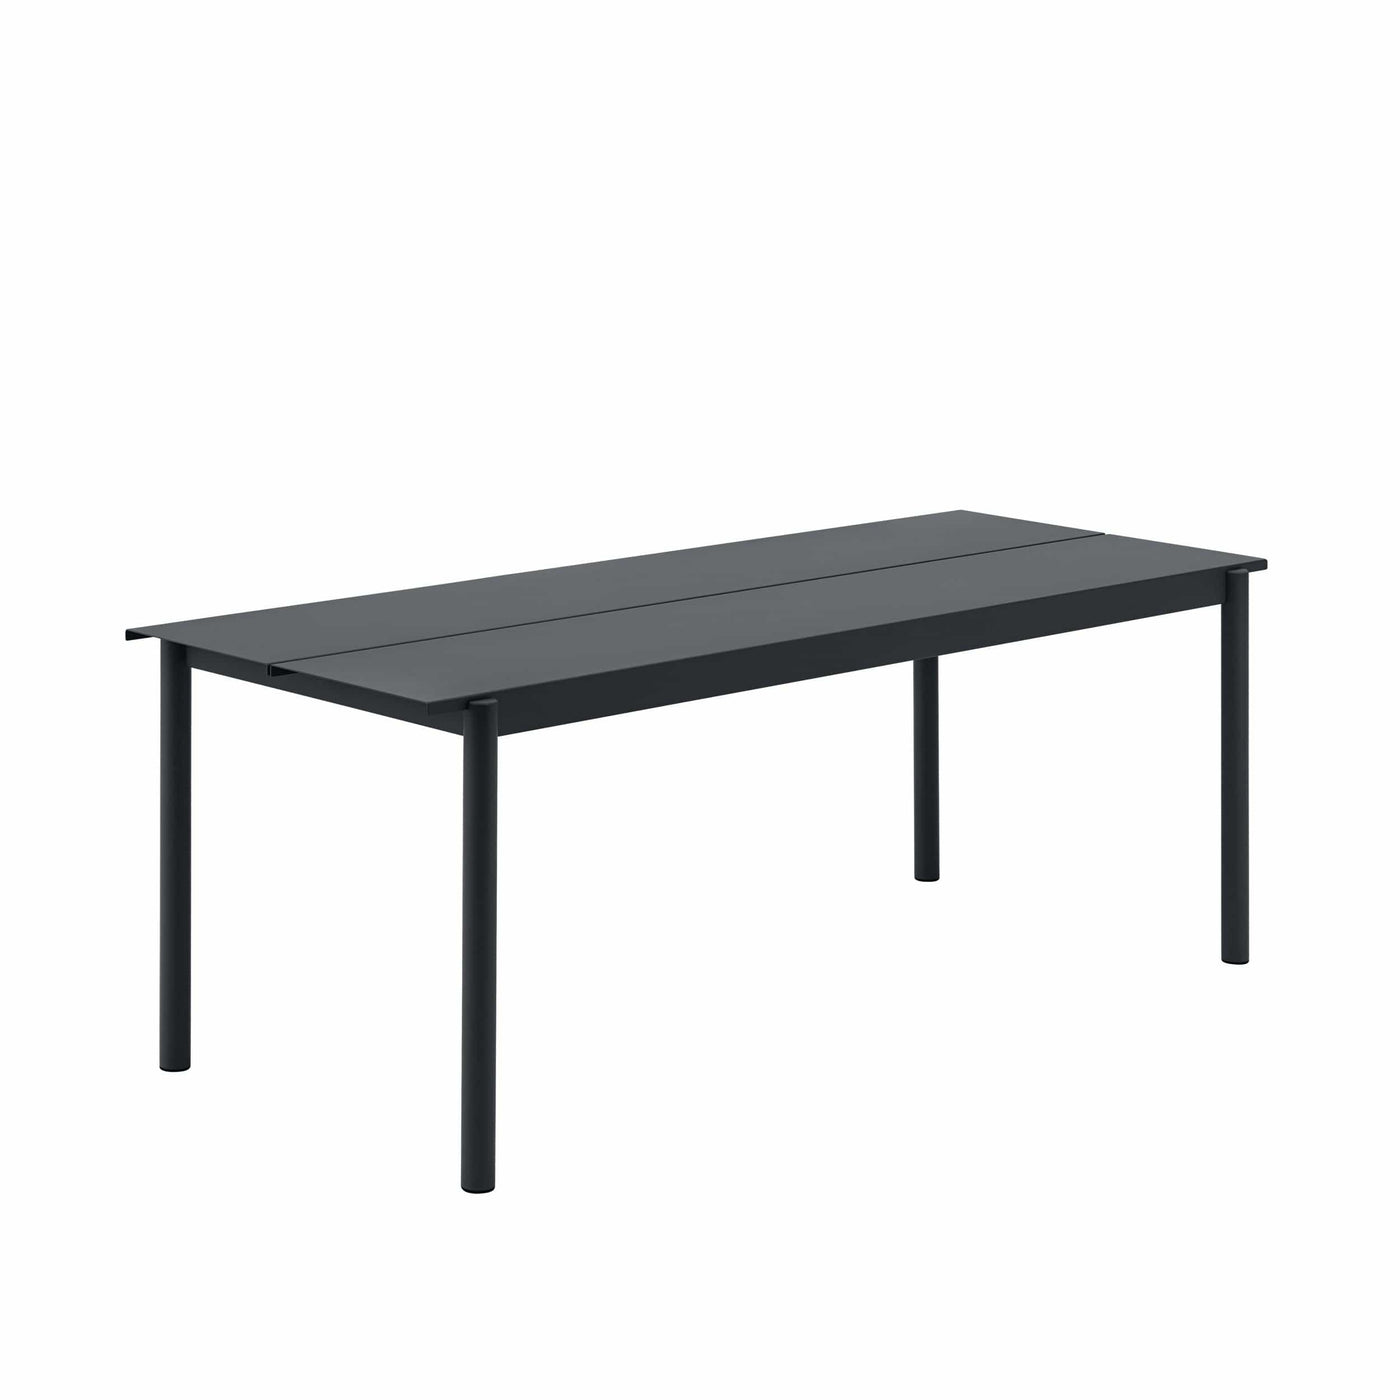 Muuto Linear Steel Table 200x75 in black, available from someday designs. #colour_black